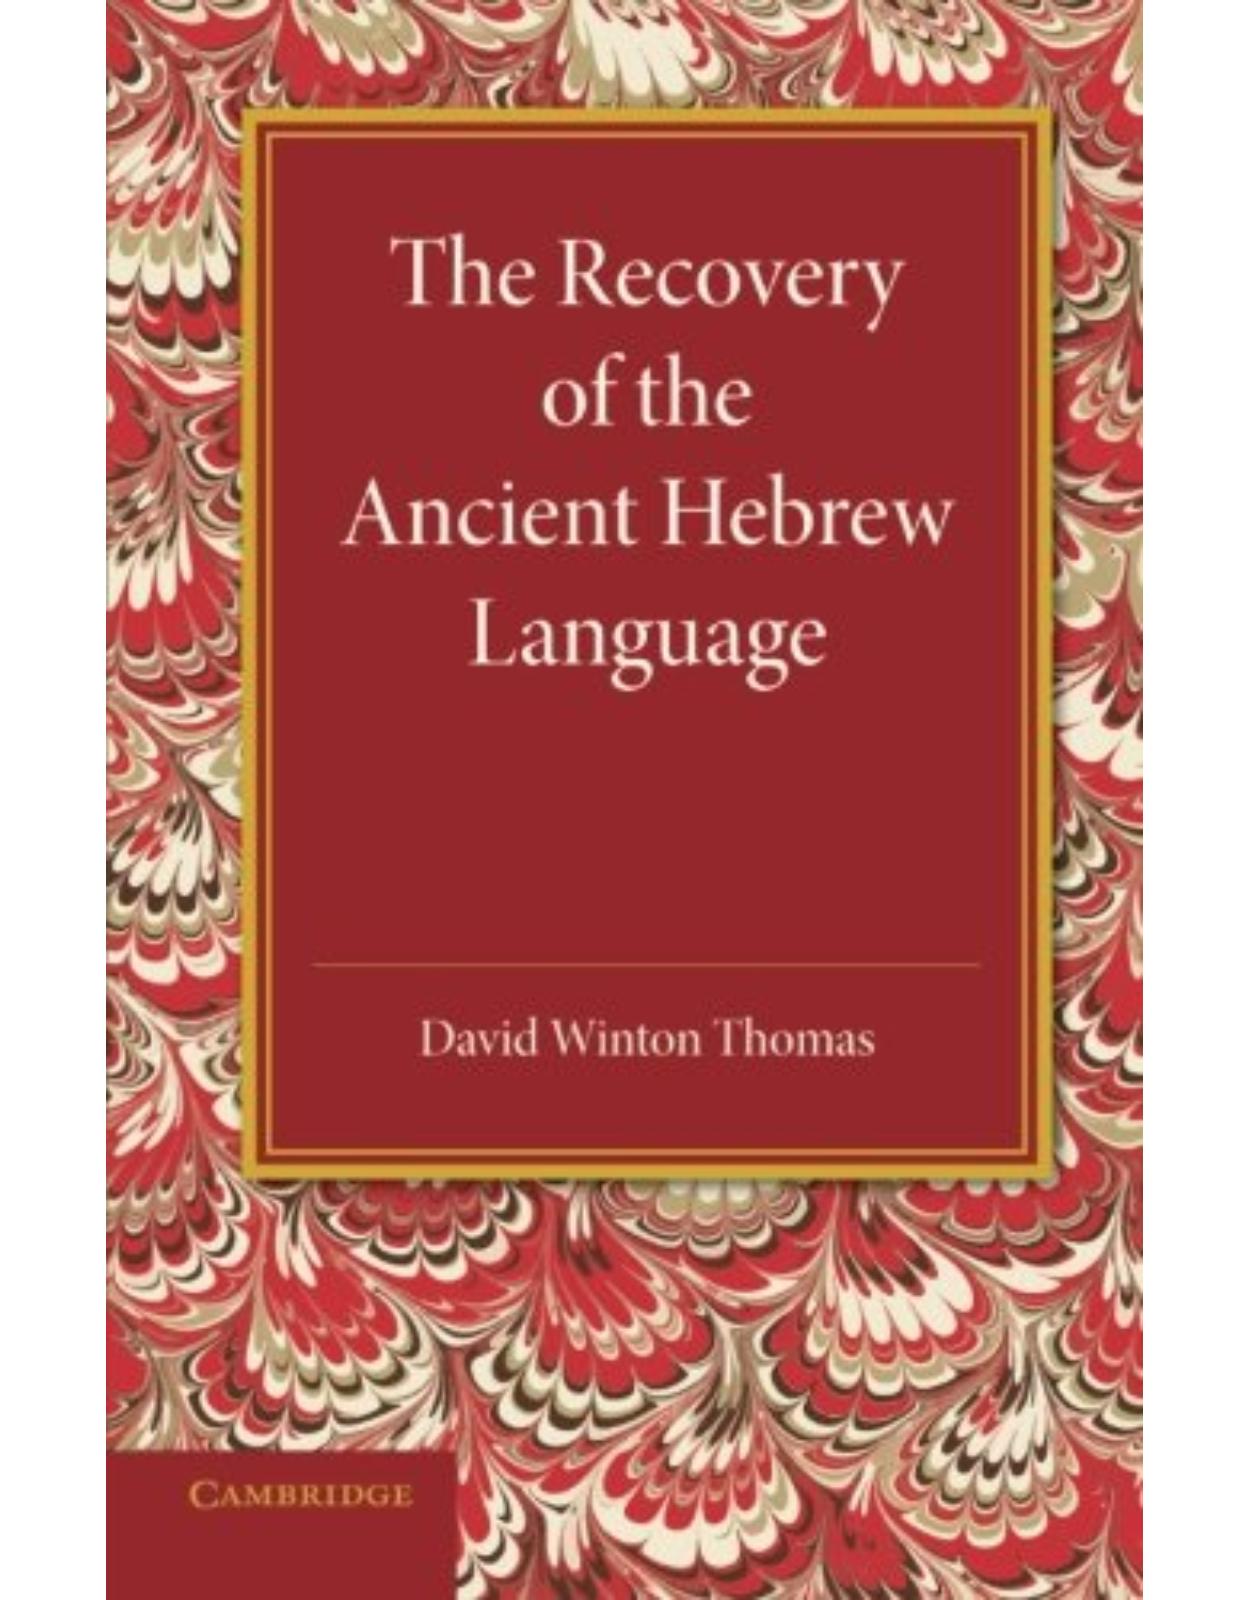 The Recovery of the Ancient Hebrew Language: An Inaugural Lecture